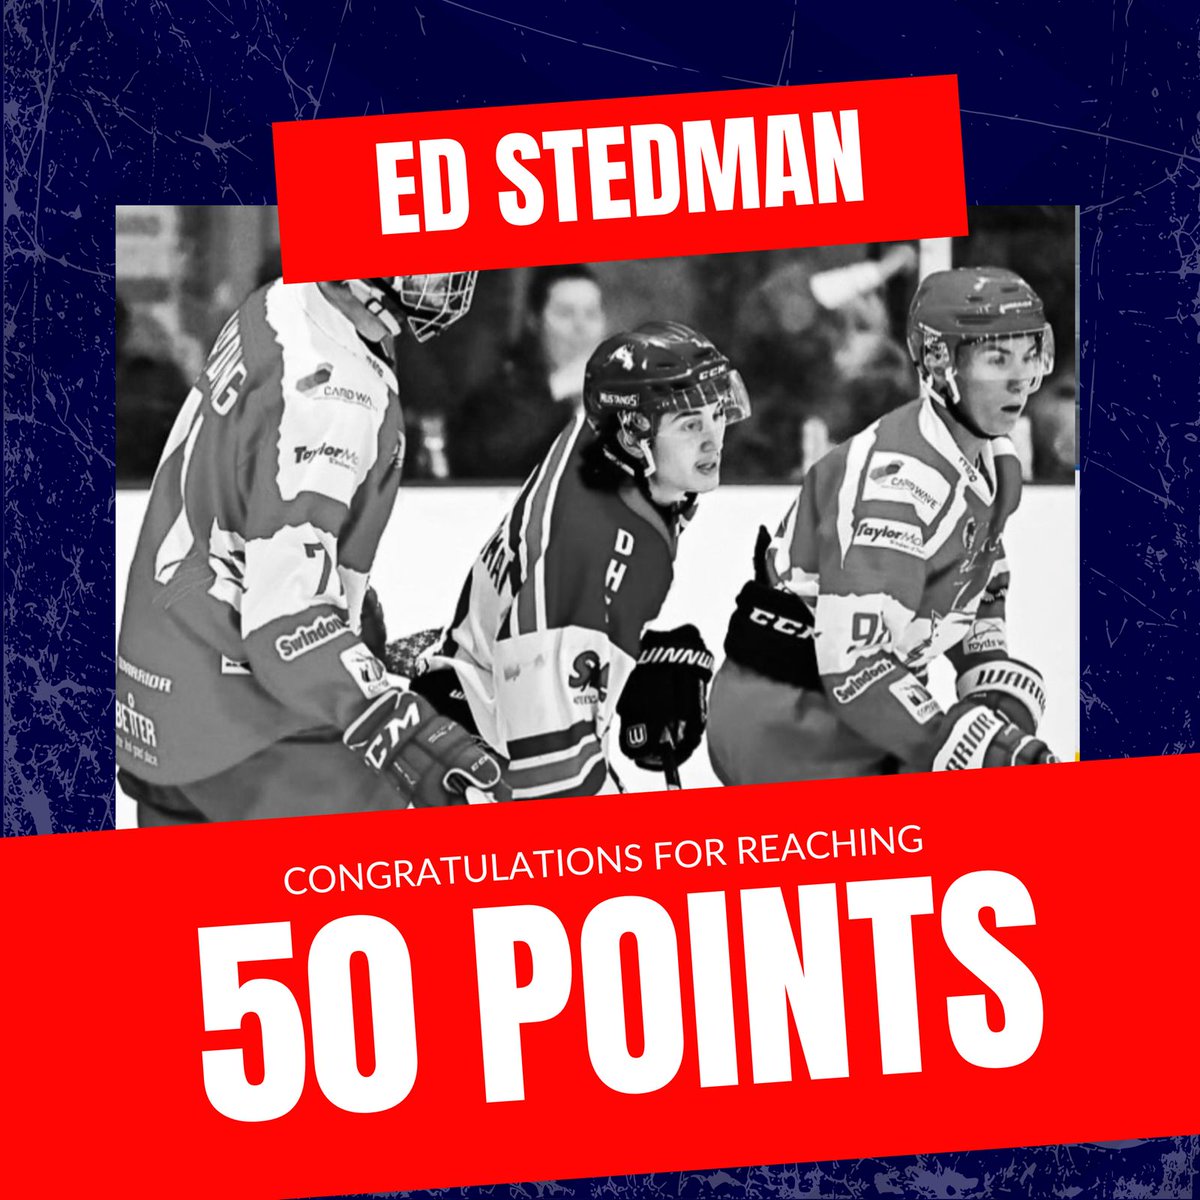 Edward Stedman has hit 50 points with the Invicta Mustangs. 25 goals and 27 assists for 52 points. The young skilled, high energy forward has shown he can put up the points as well as mix it up physically, hard hitting and will drop the gloves if needed.